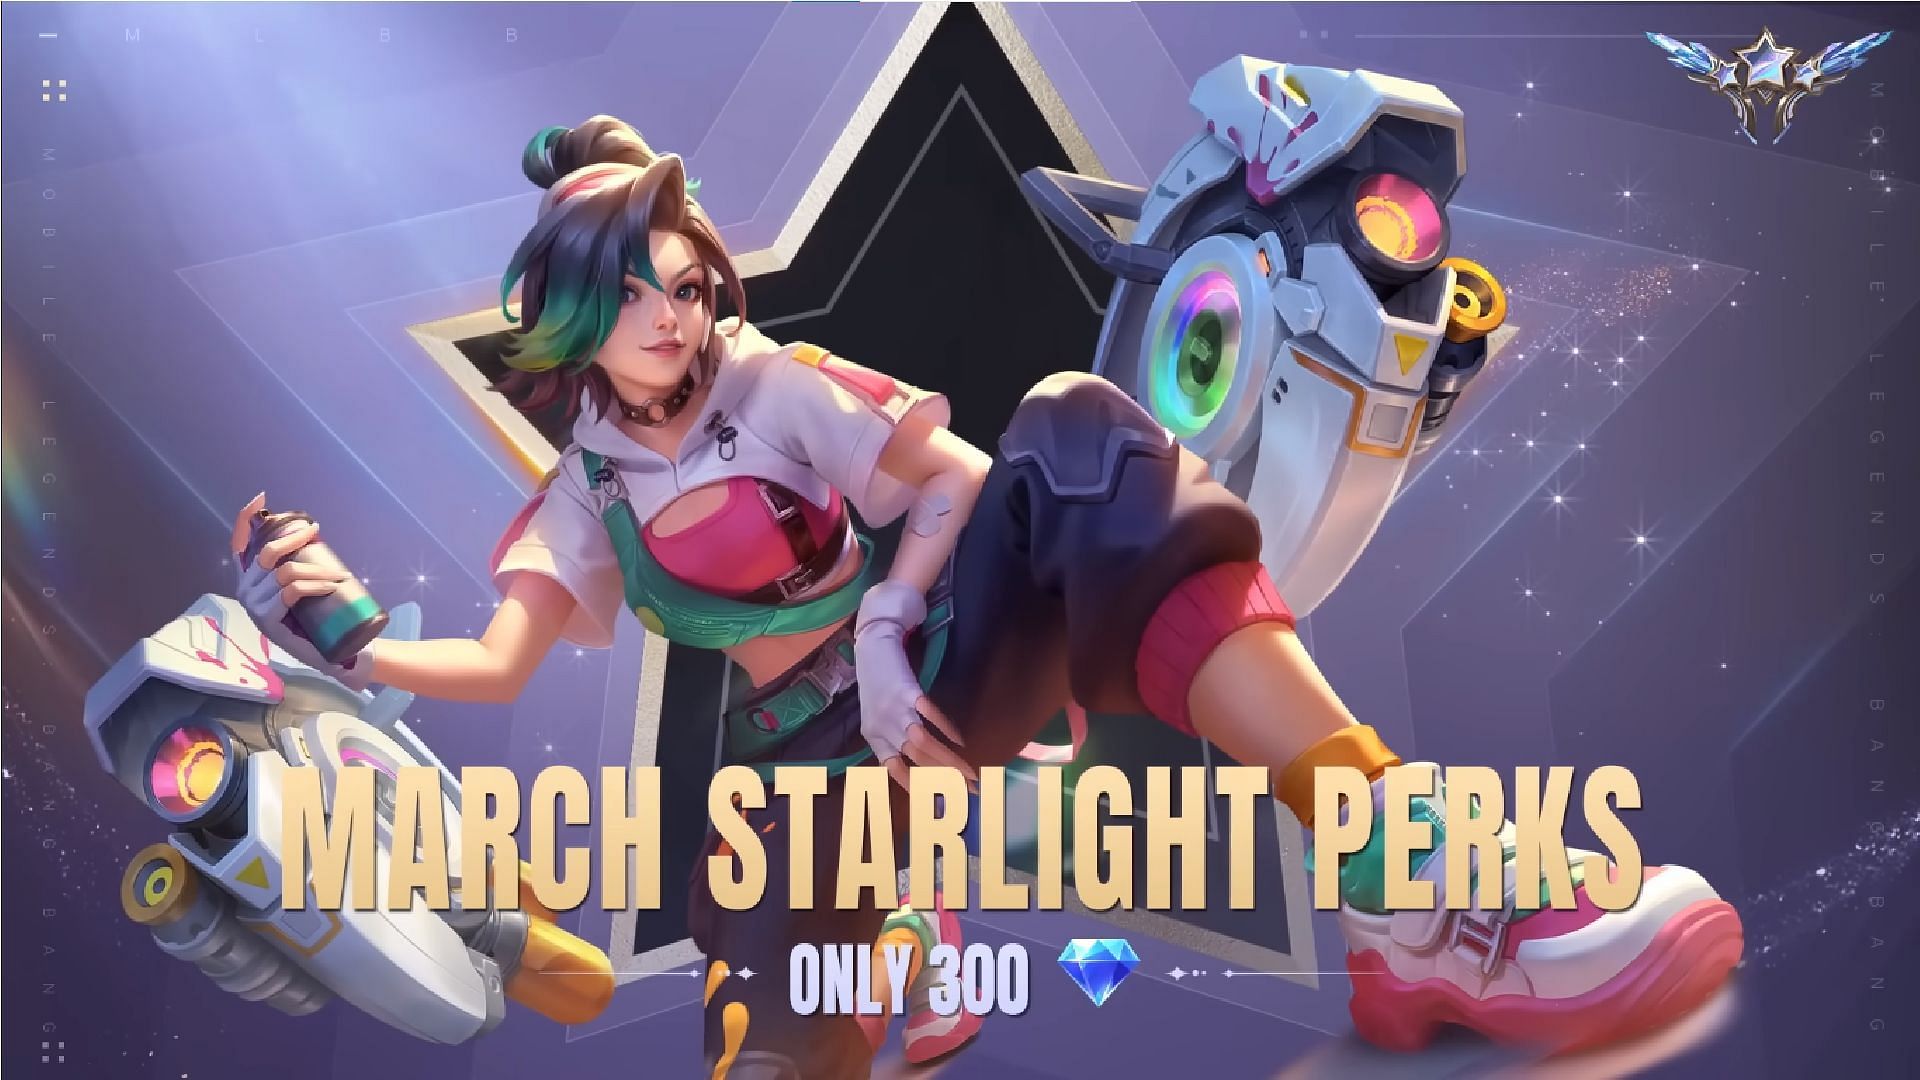 The pass is available only for 300 diamonds (Image via Moonton Games)